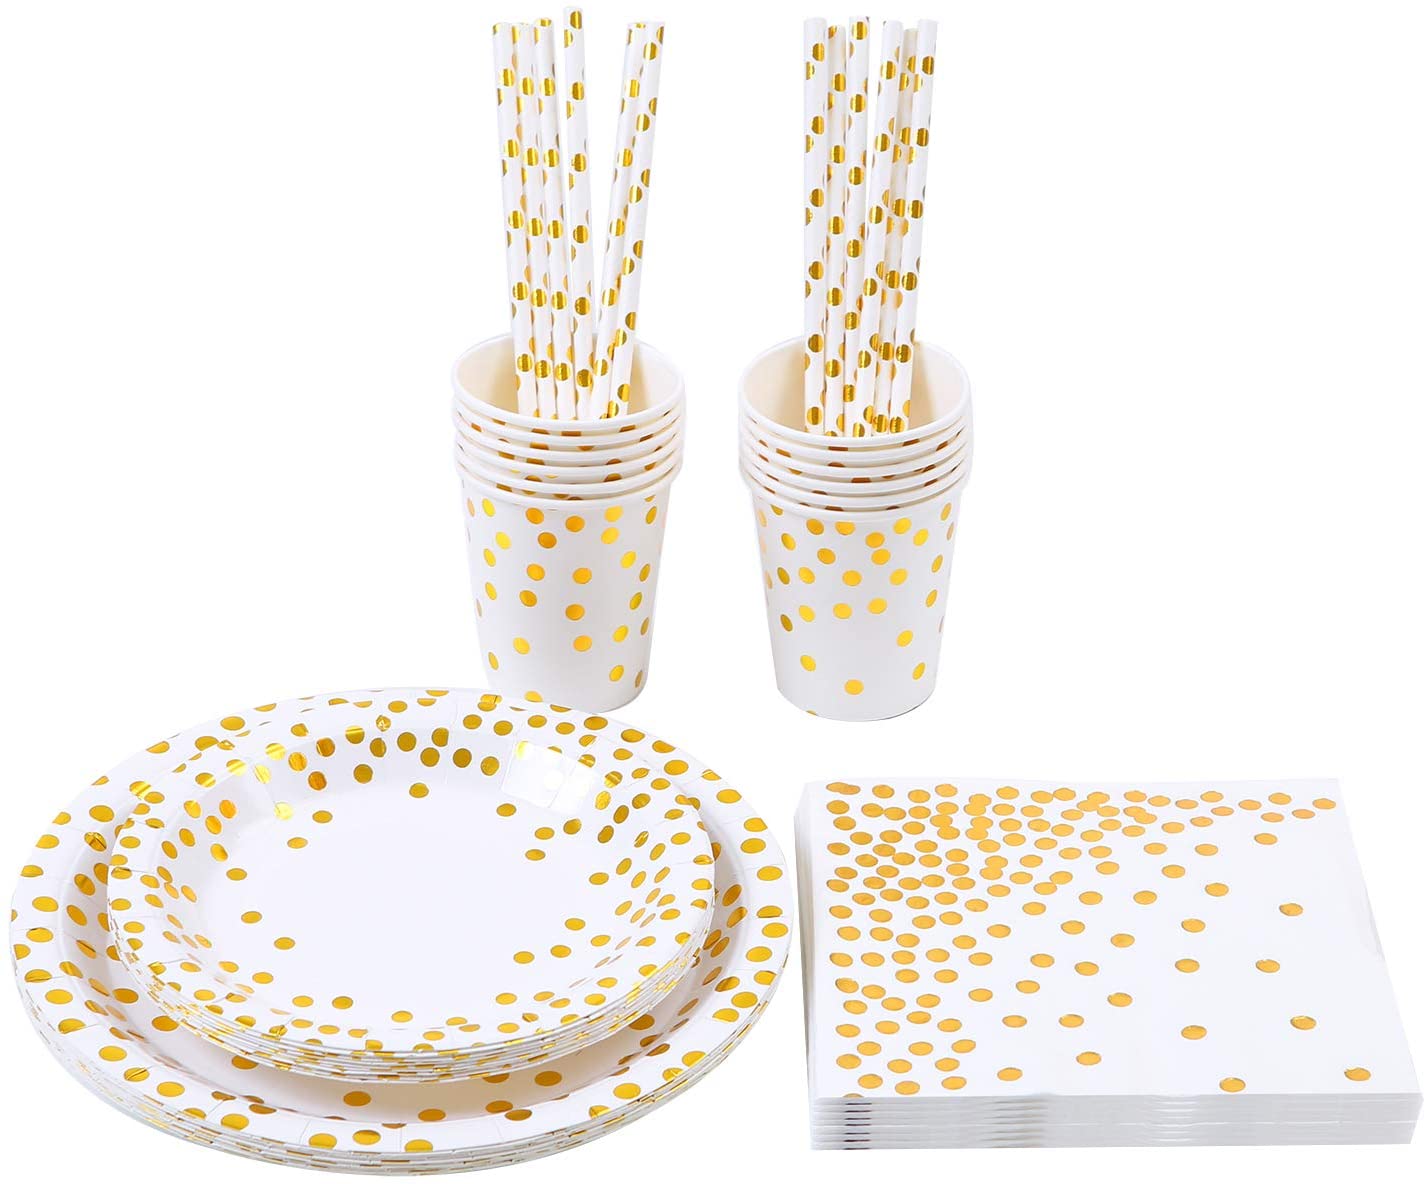 Gold Disposable Dinnerware Set Paper Party Supplies Set Dessert and Dinner Gold Paper Plates Napkins Cups Straws